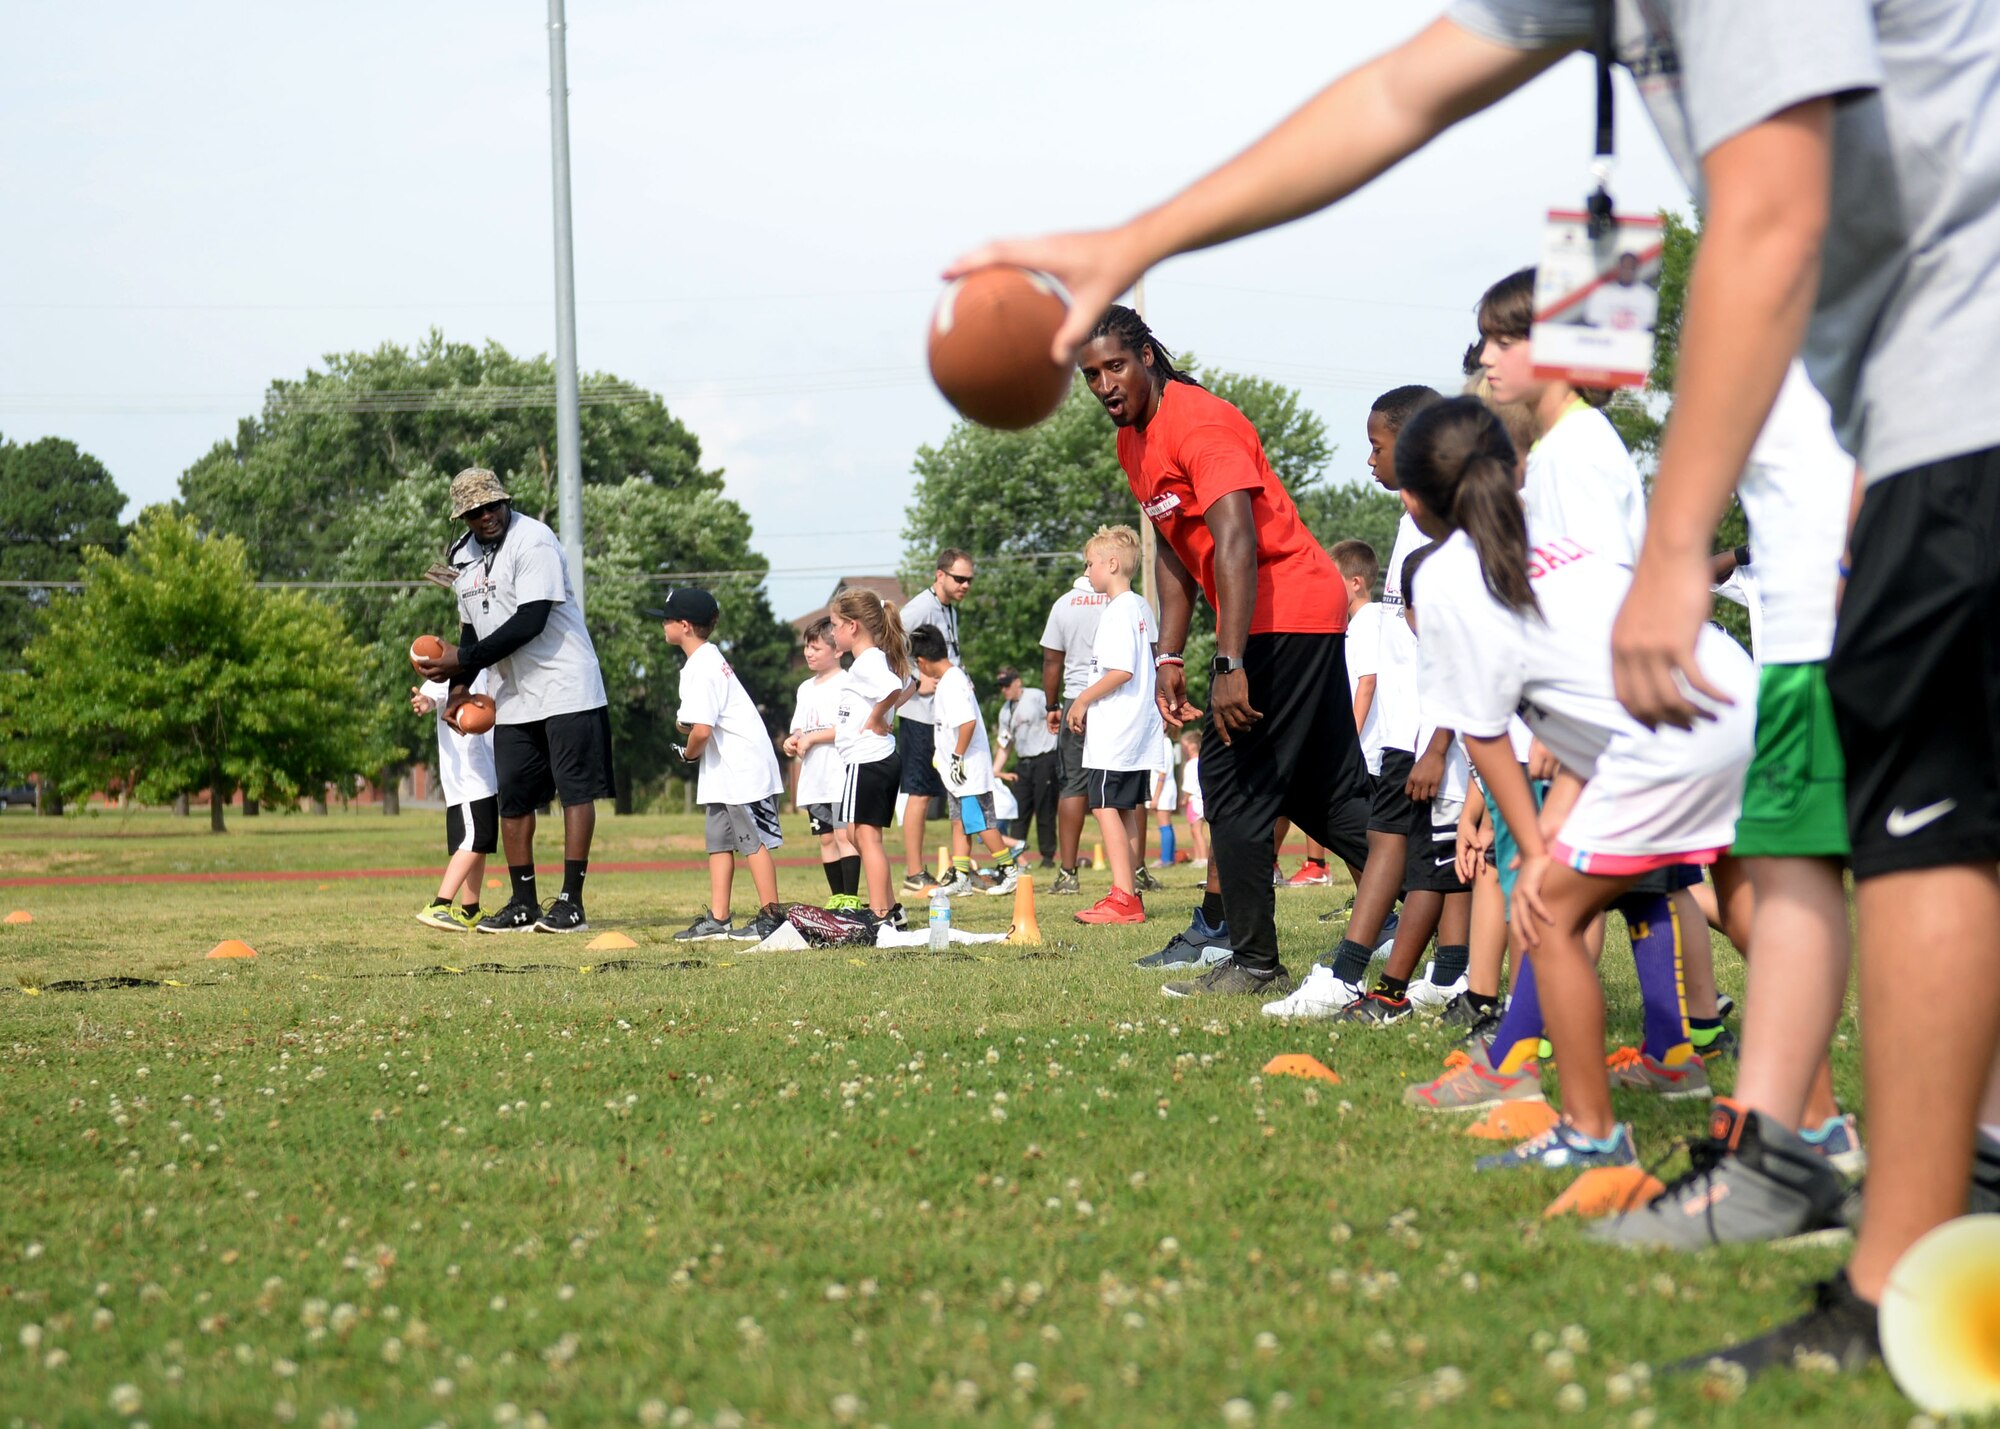 Andre Roberts, an Atlanta Falcons wide receiver and former military child, teaches a football drill during the Proctor & Gamble Andre Roberts Football ProCamp June 16, 2017, at Little Rock Air Force Base, Arkansas. All Defense Commissary Agencies participated in a competition to win the event for their bases, and the ones with the most support from the community were awarded a ProCamp. (U.S. Air Force photo by Airman 1st Class Codie Collins)